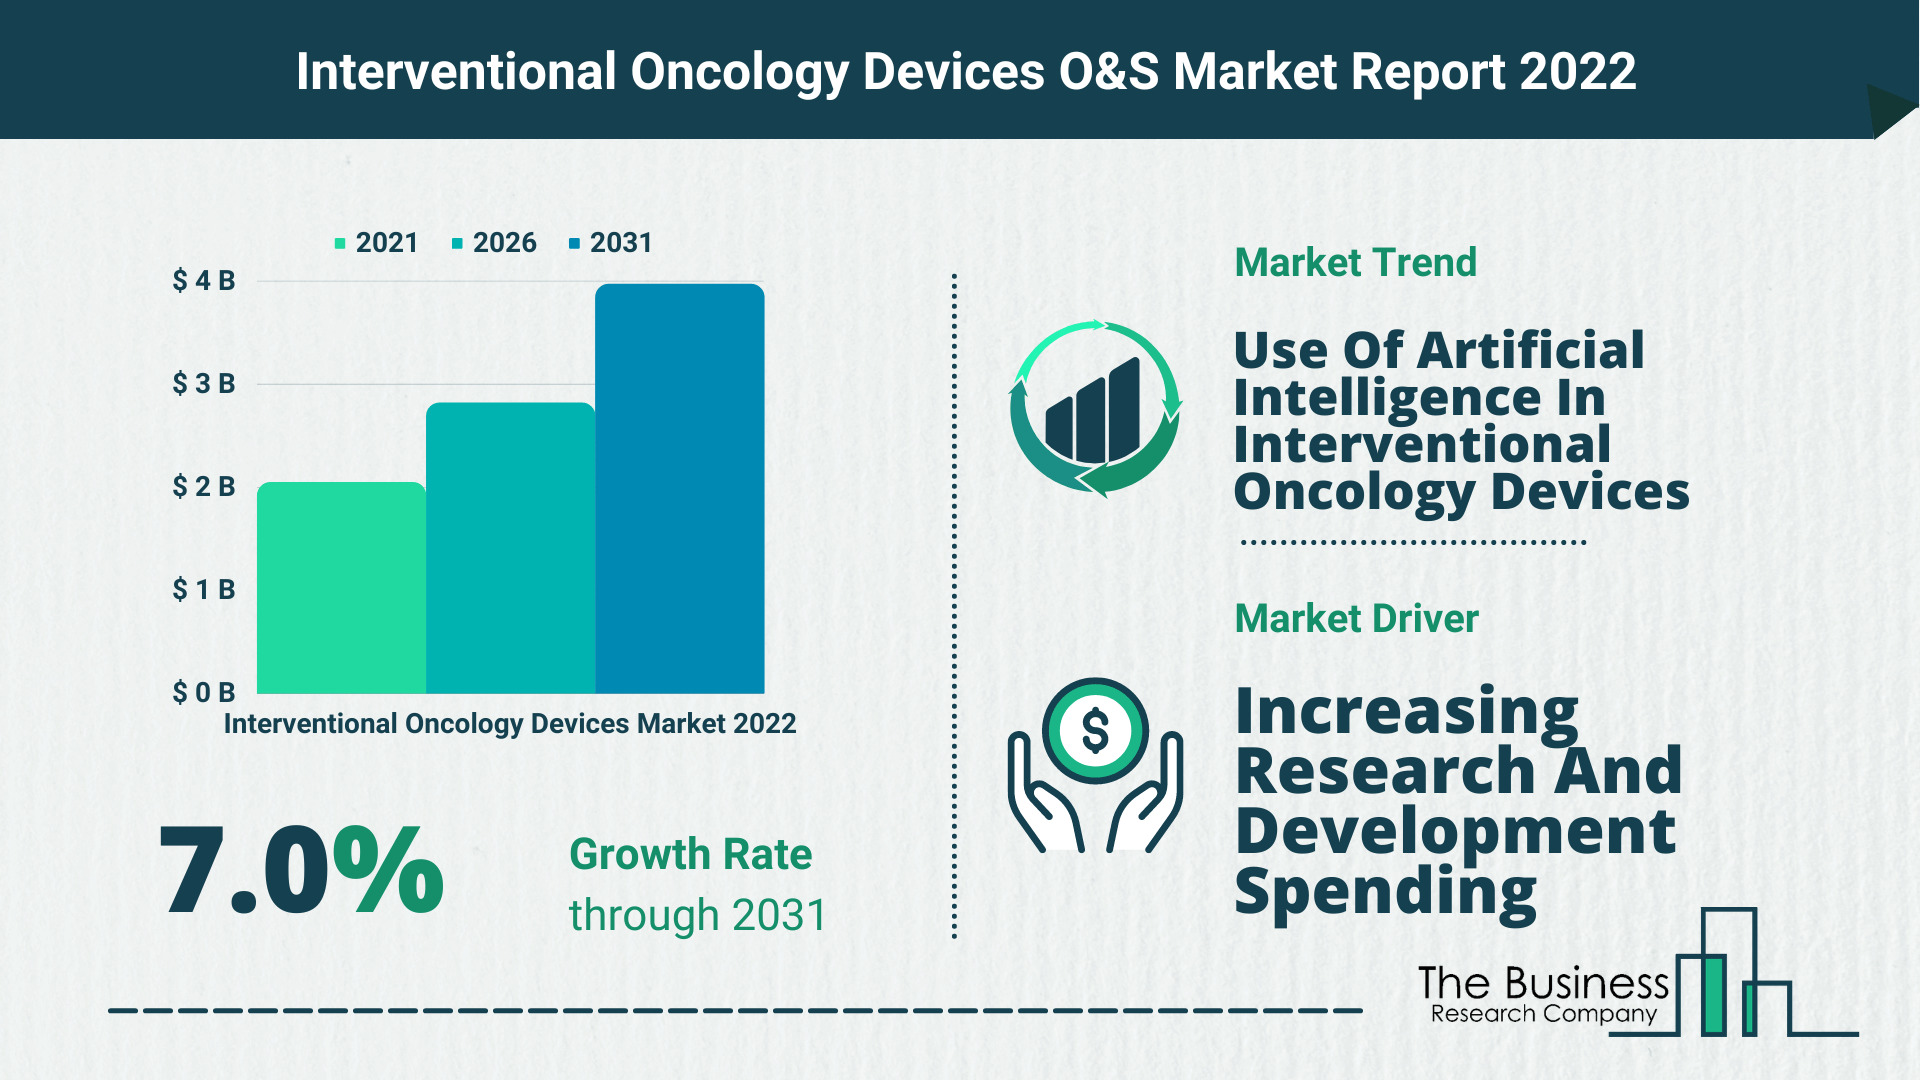 Global Interventional Oncology Devices Market